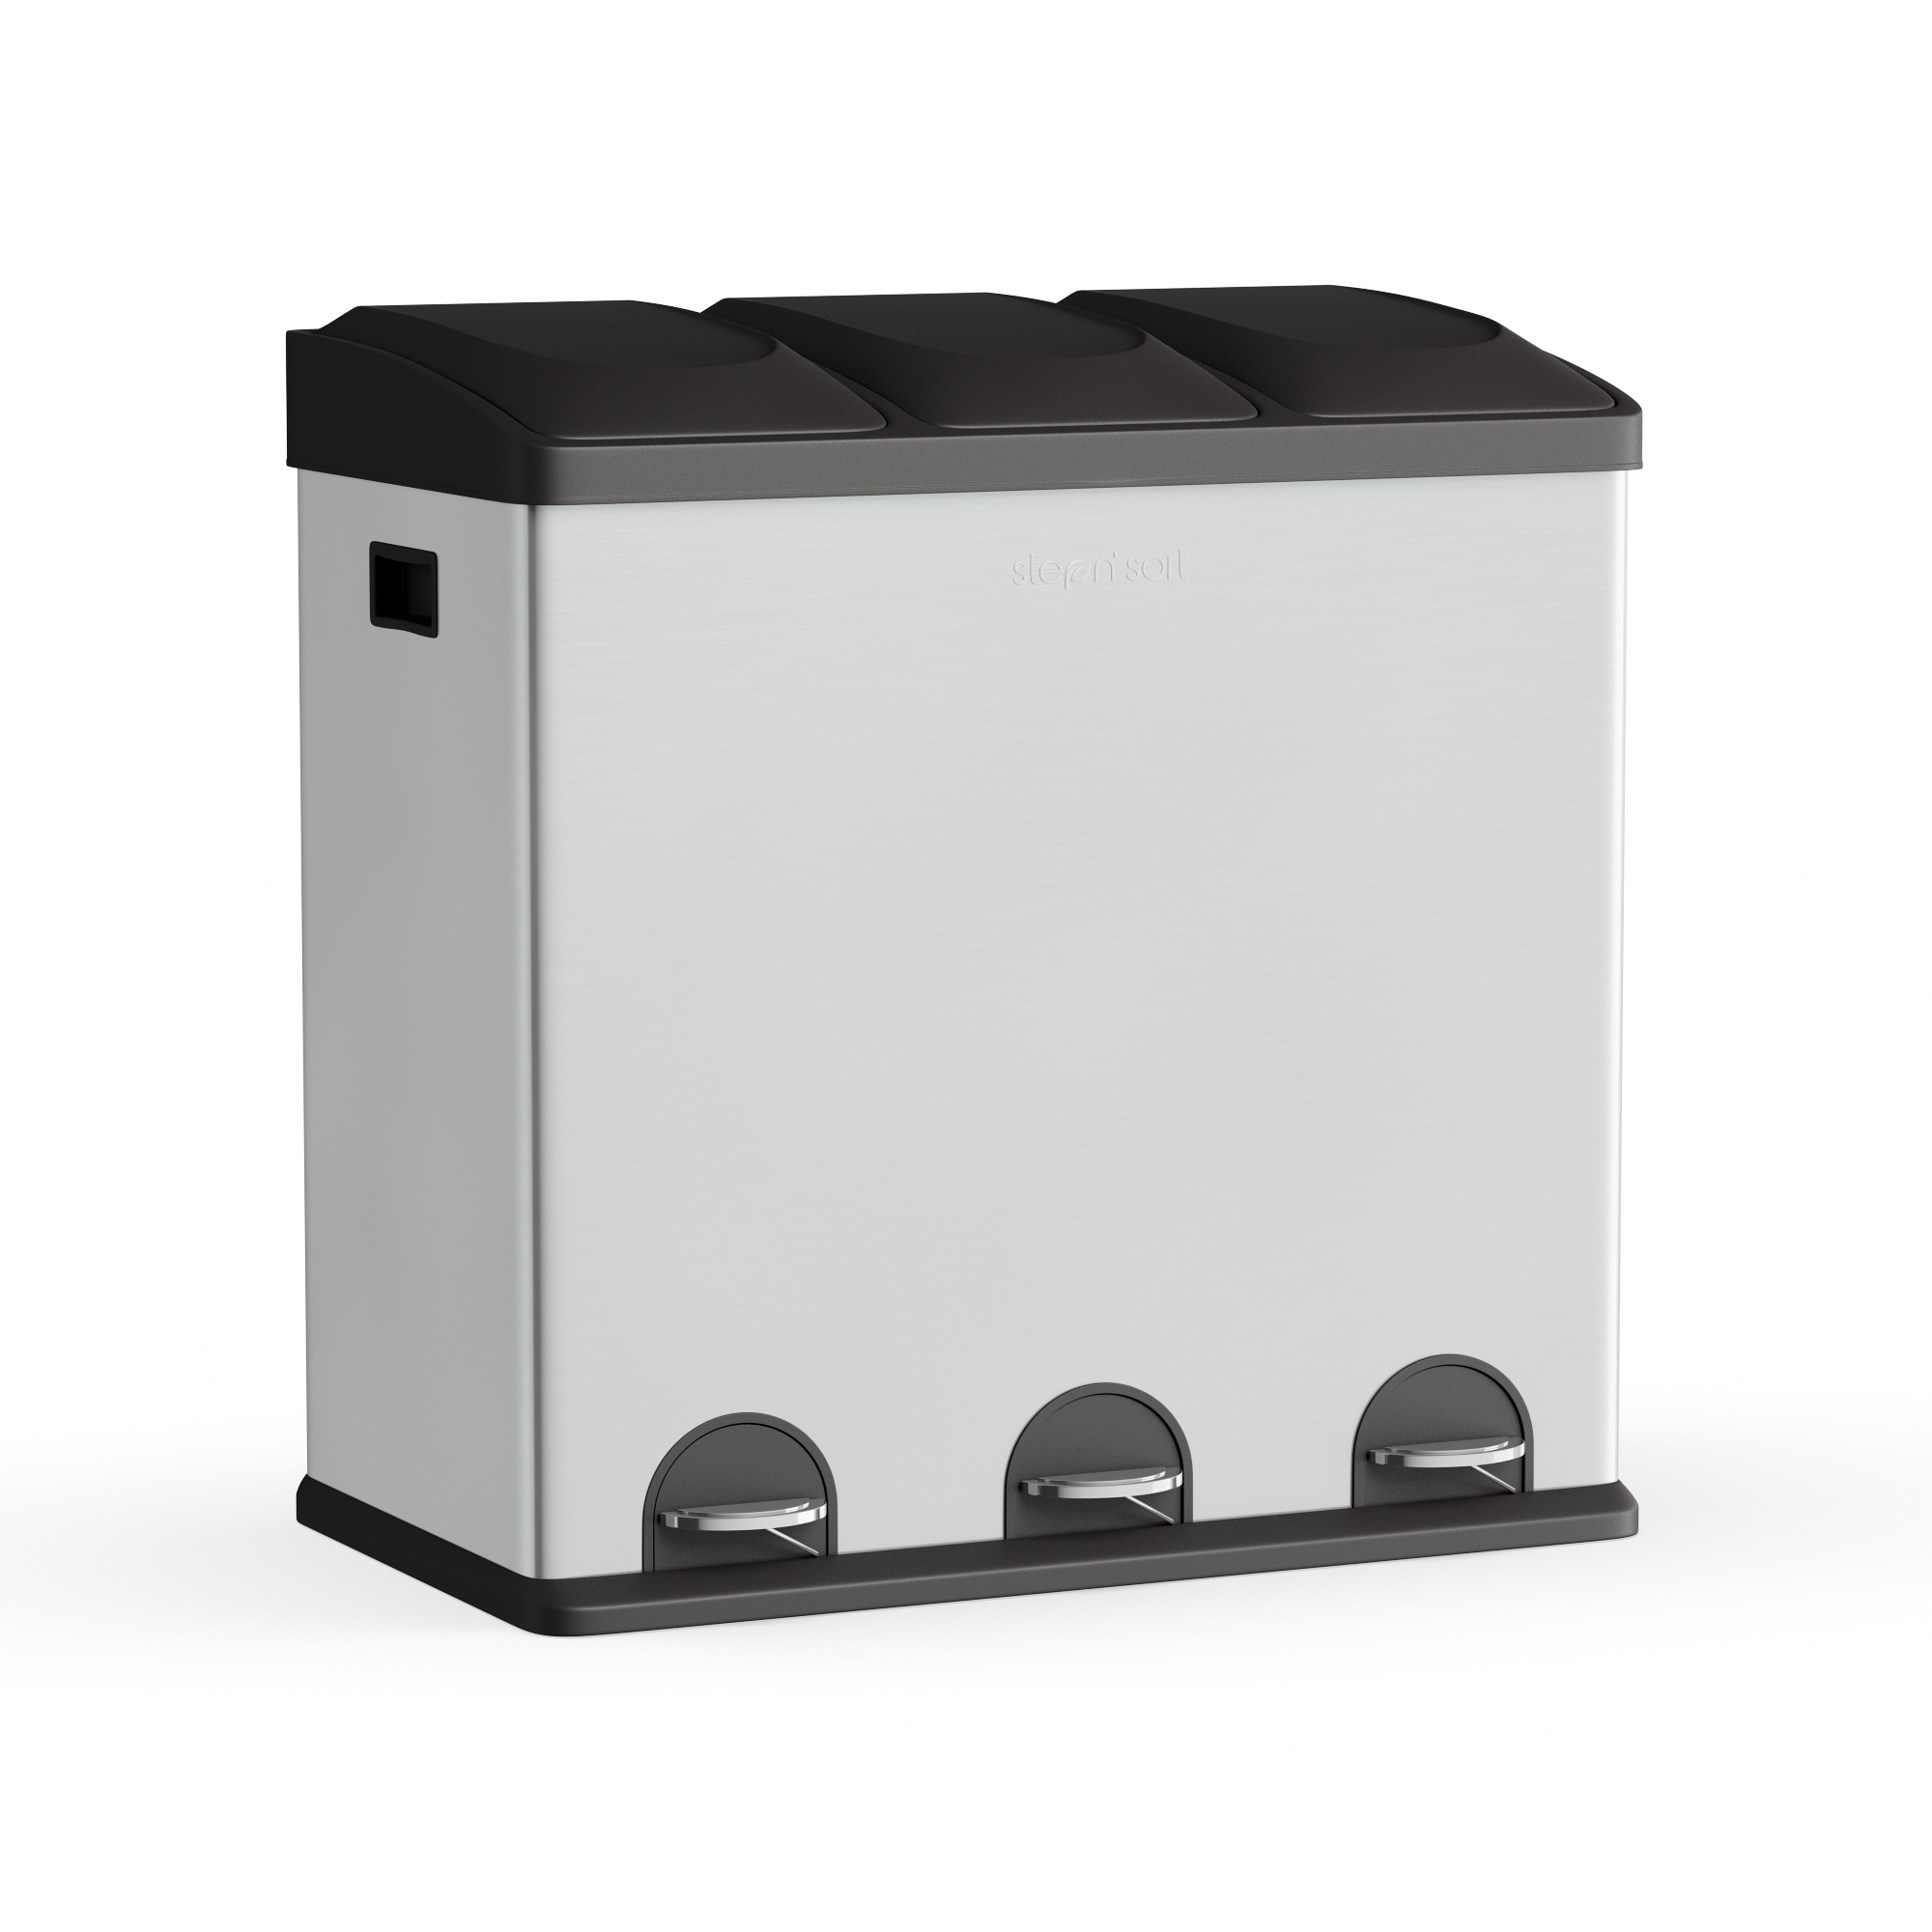 Step N' Sort 3-Compartment Stainless Steel Kitchen Trash and Recycling Bin, 16 gal - image 1 of 15